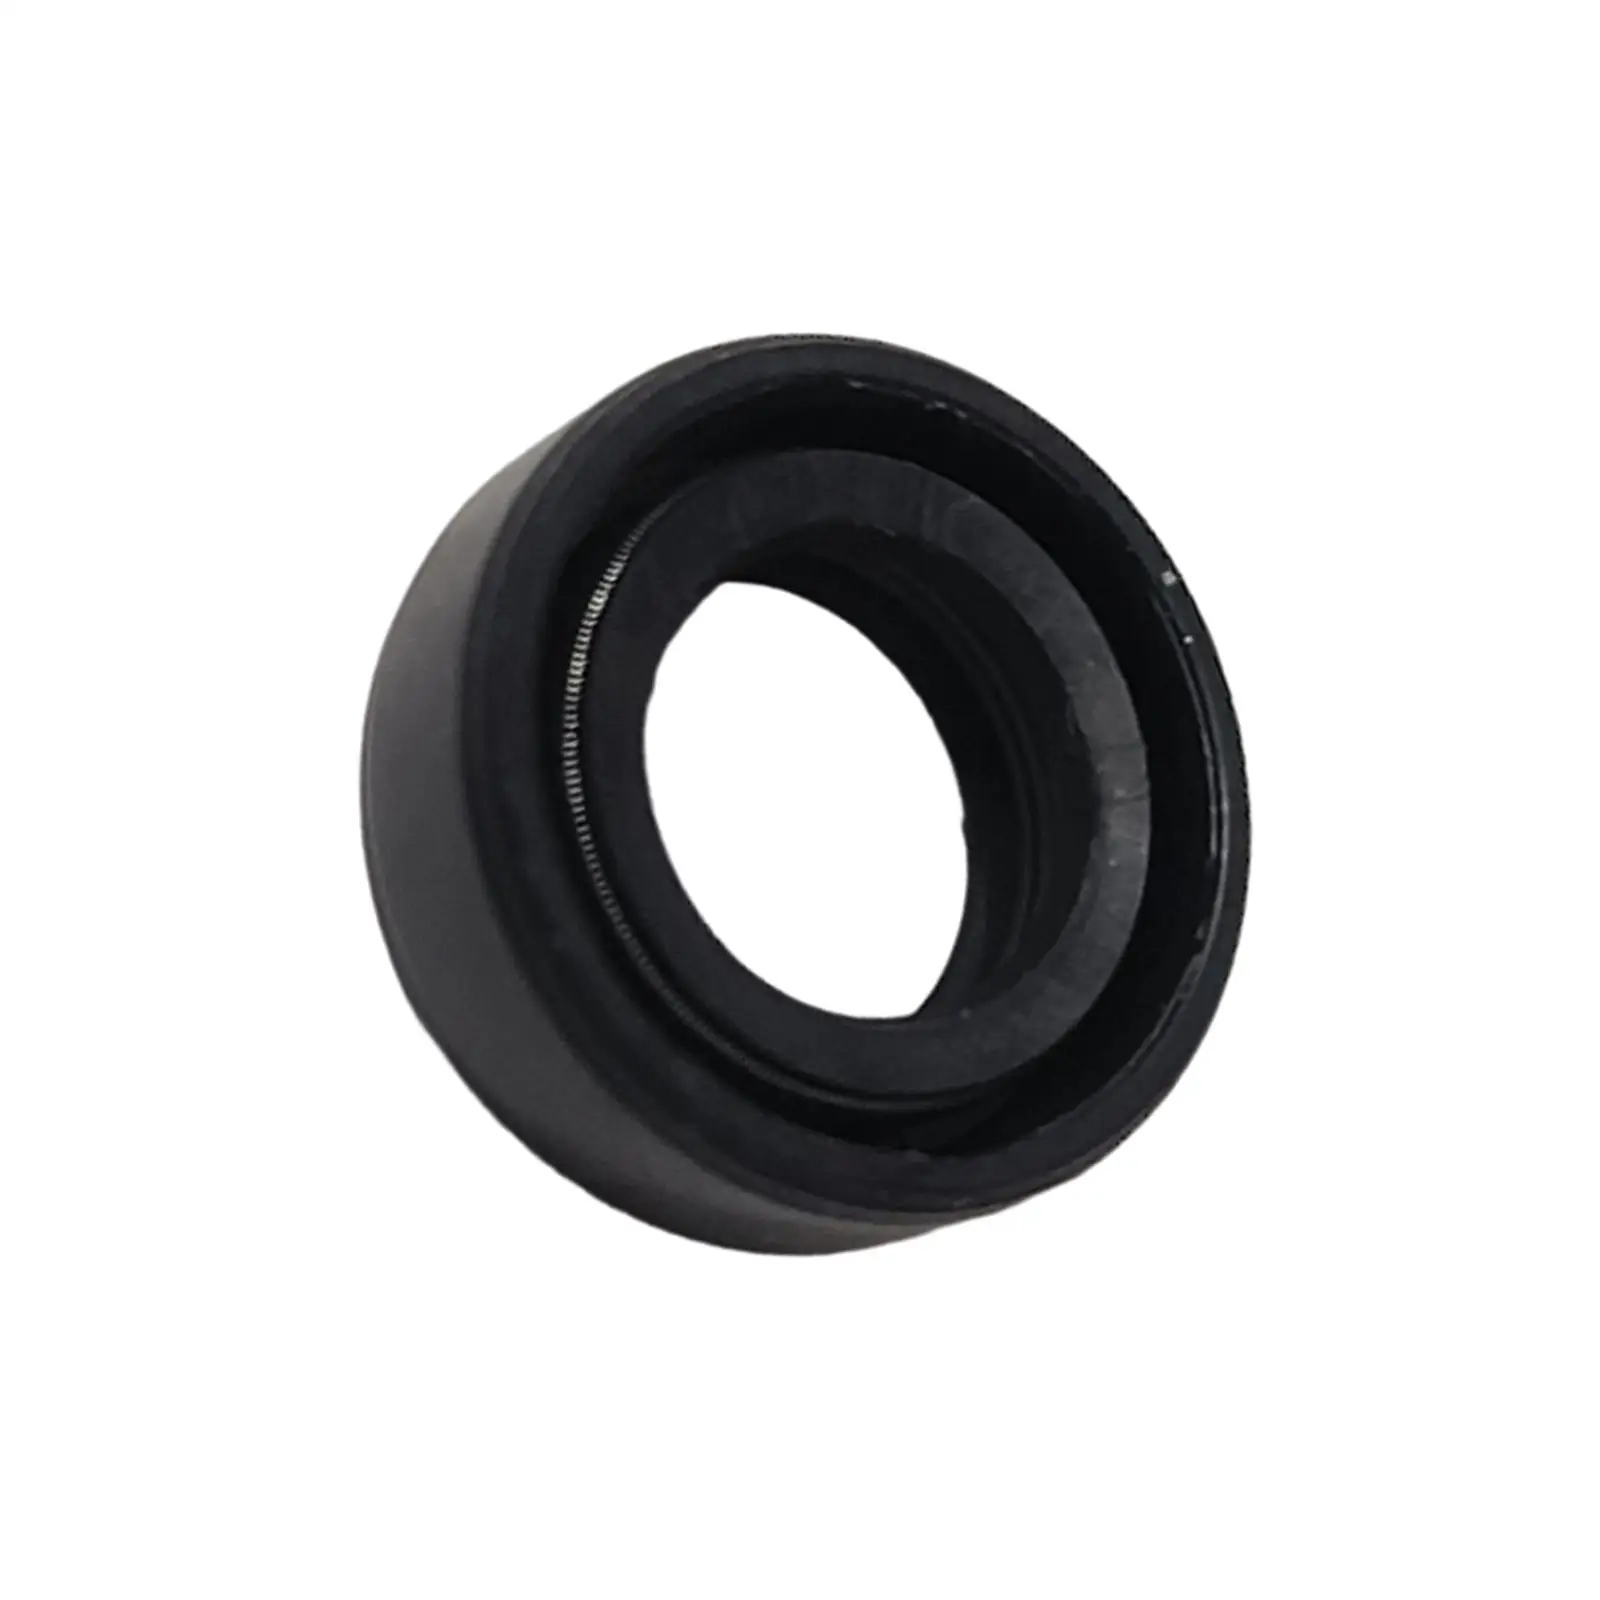 93101-13M12 931011380000 Shaft Oil Seals Fit for Yamaha 3HP 4HP 5HP Outboard Motor